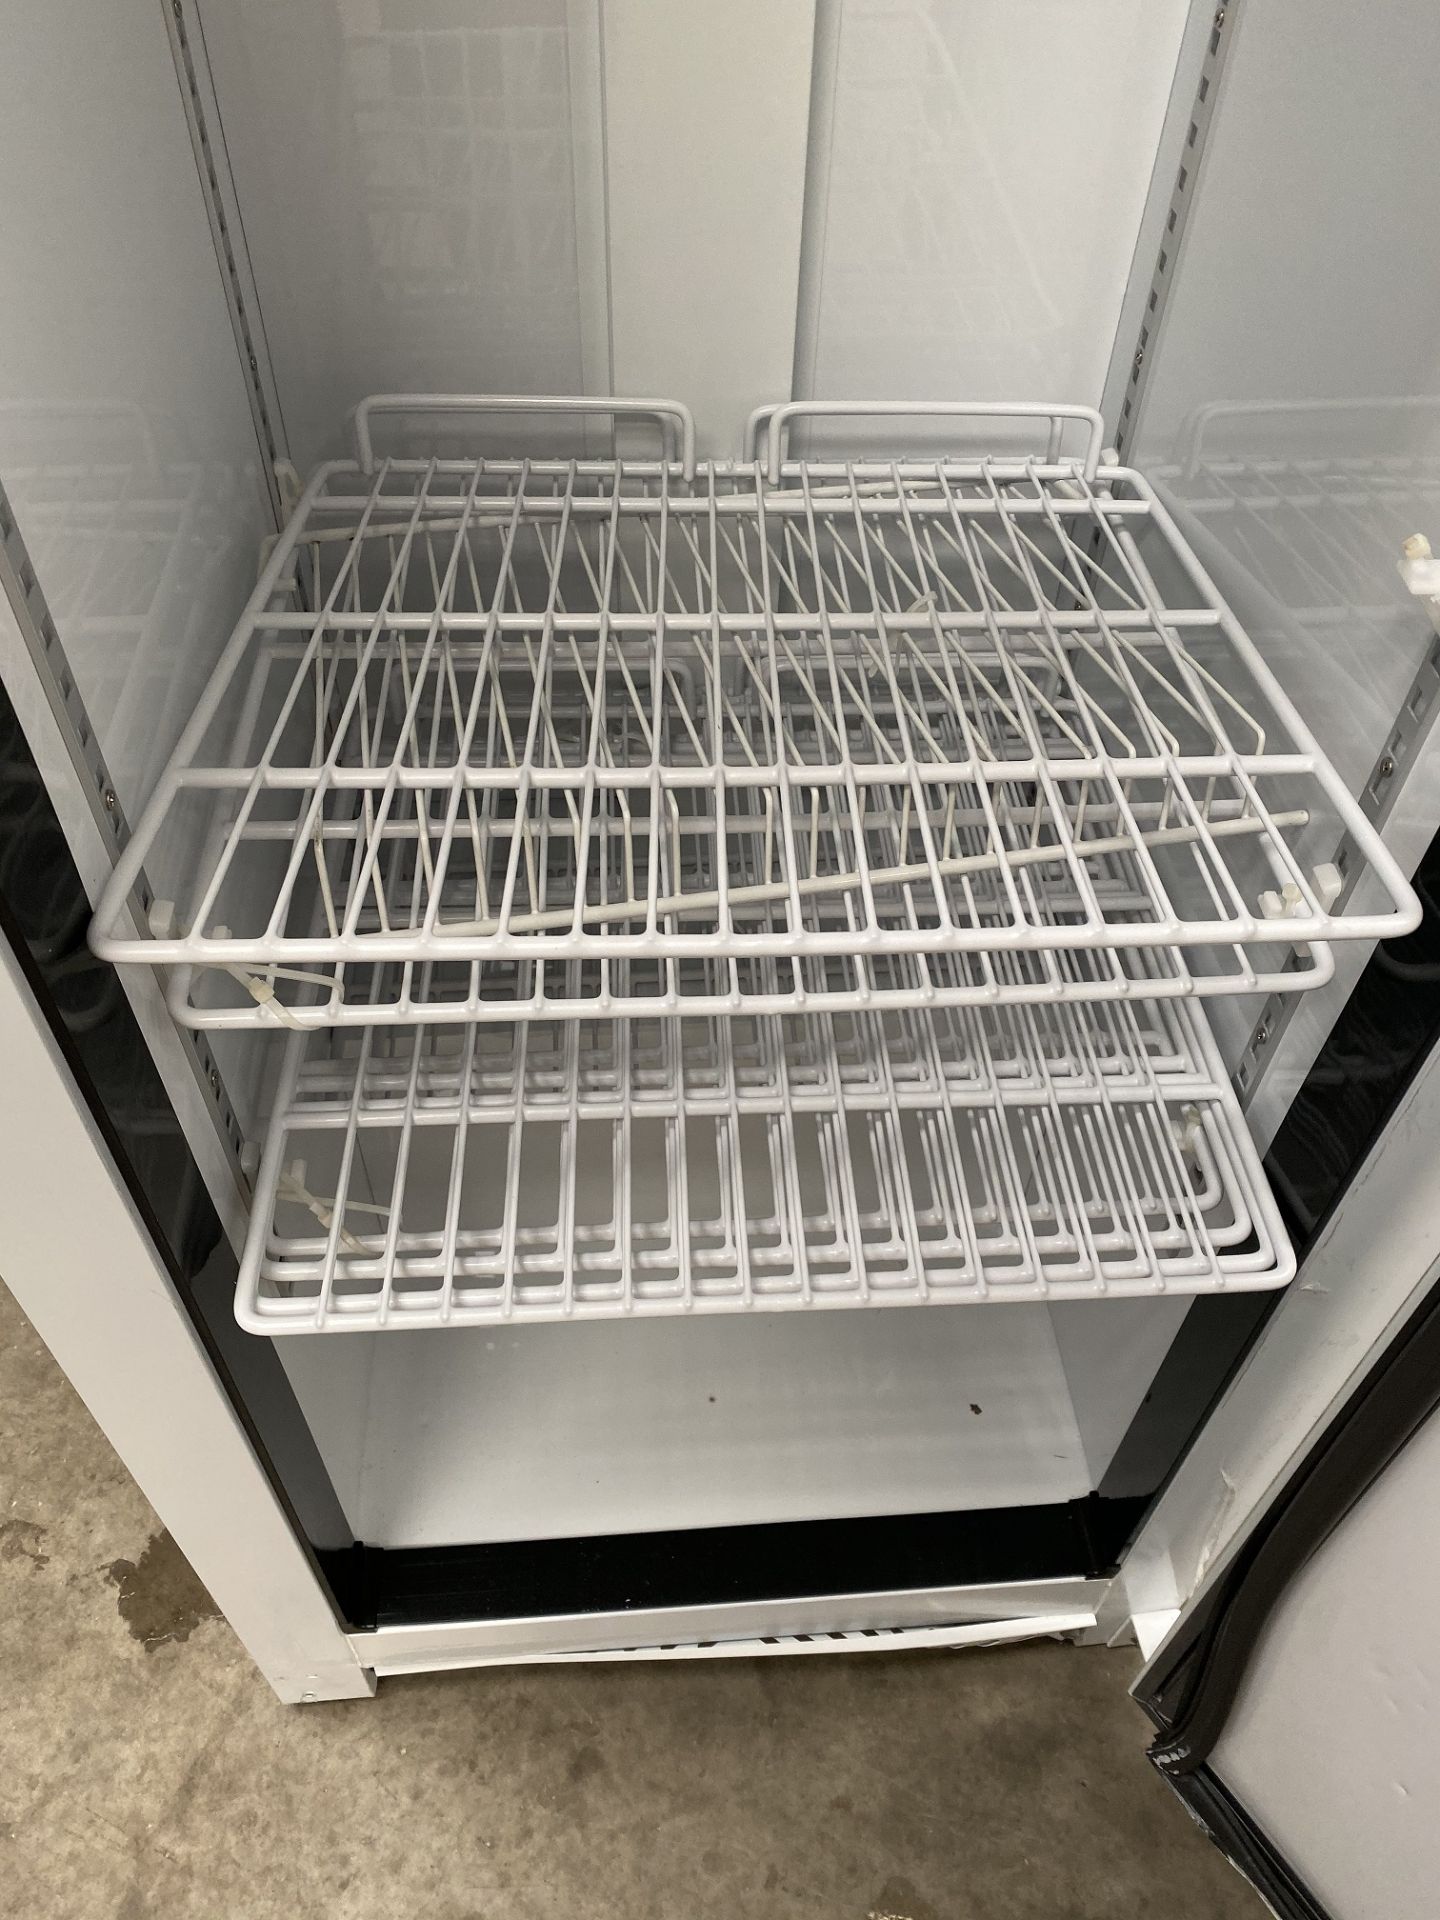 Best Frost Upright Freezer - Image 2 of 5